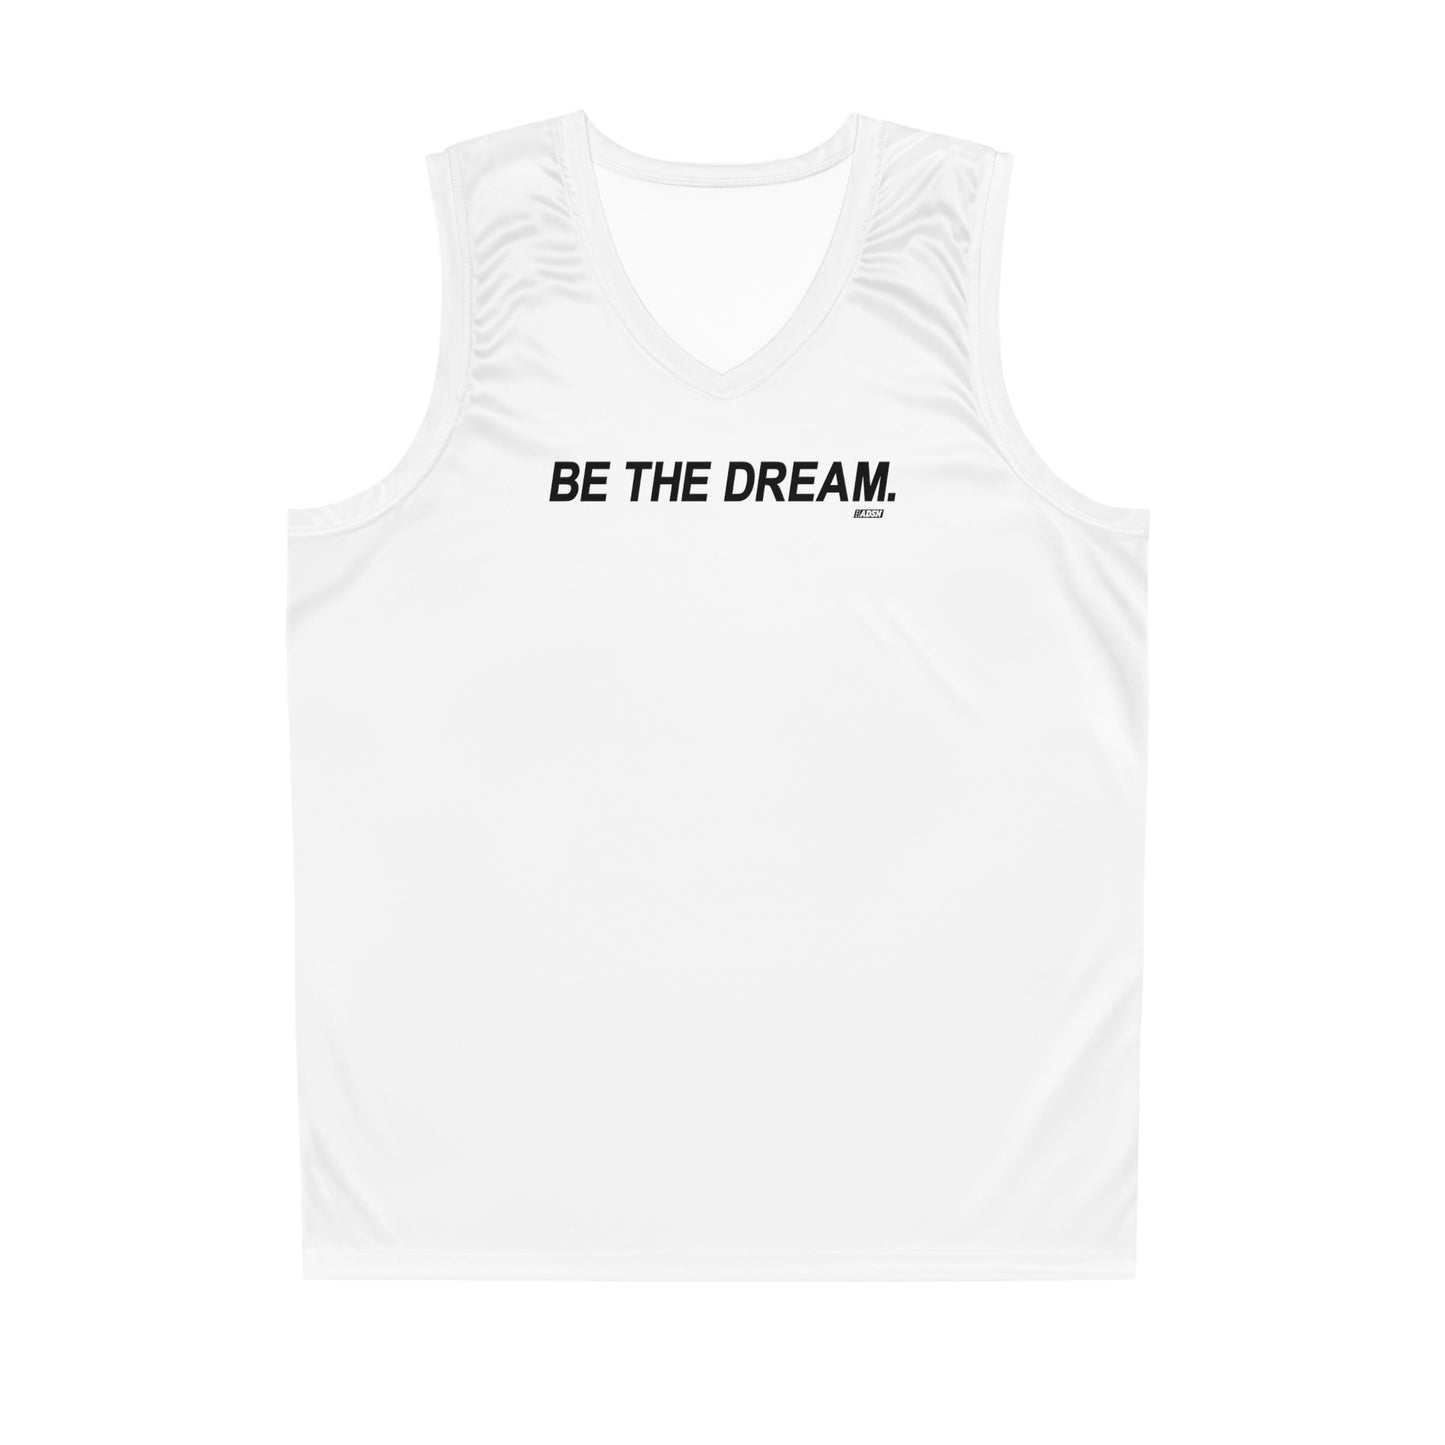 "Be The Dream" Basketball Jersey